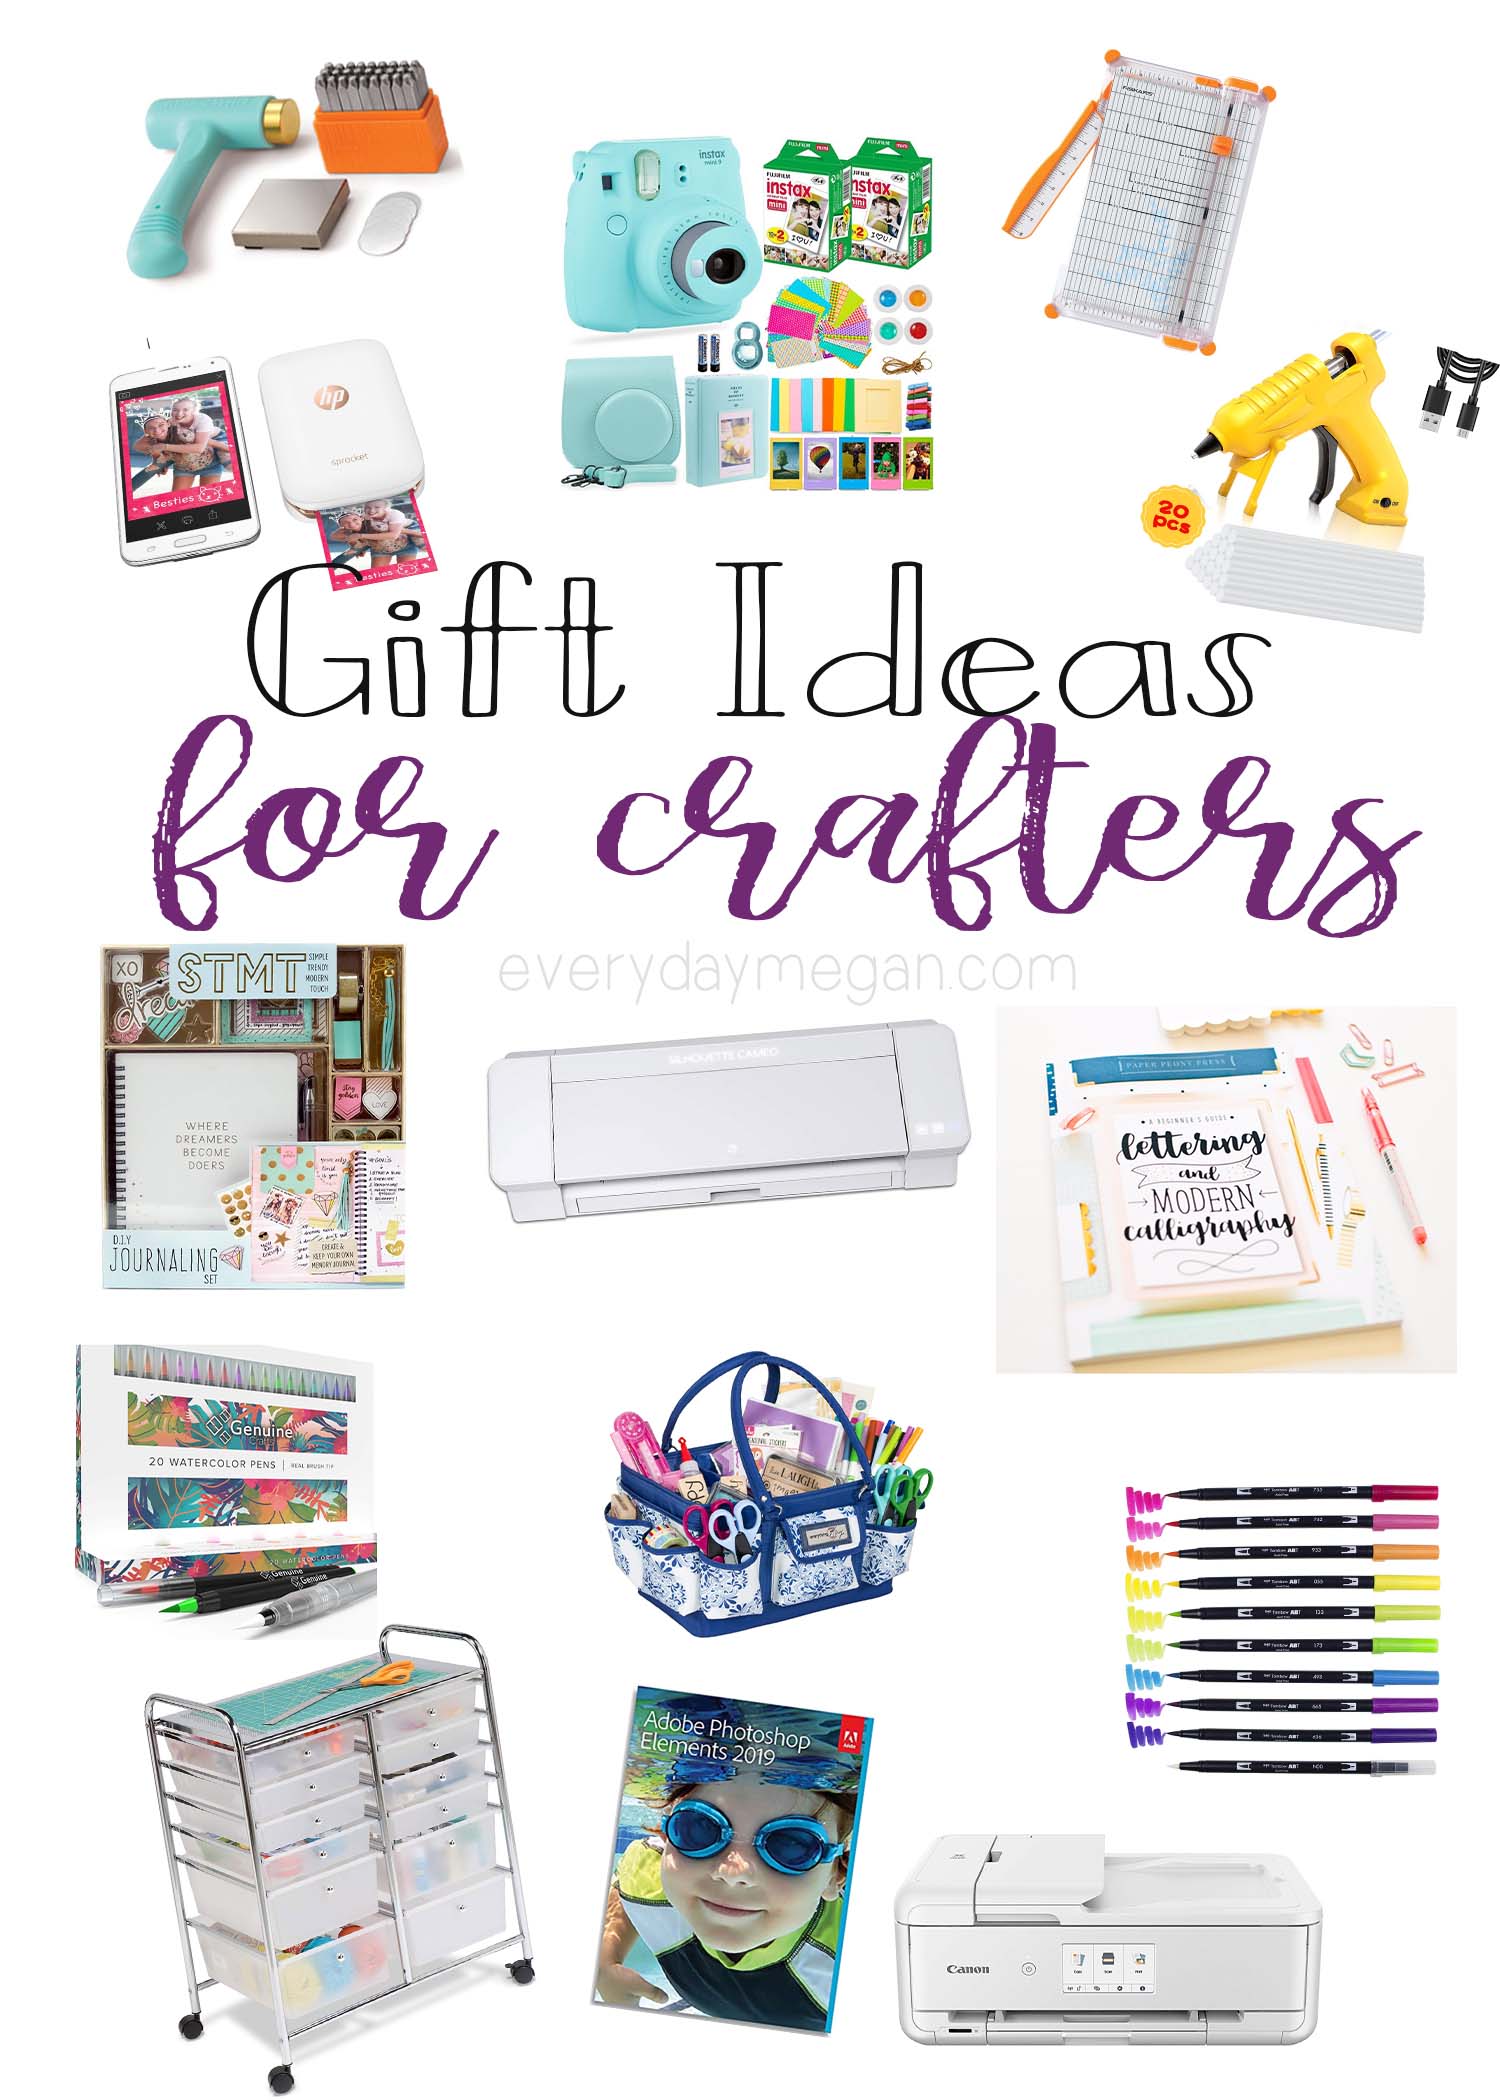 The Best Gift Ideas for Crafters!